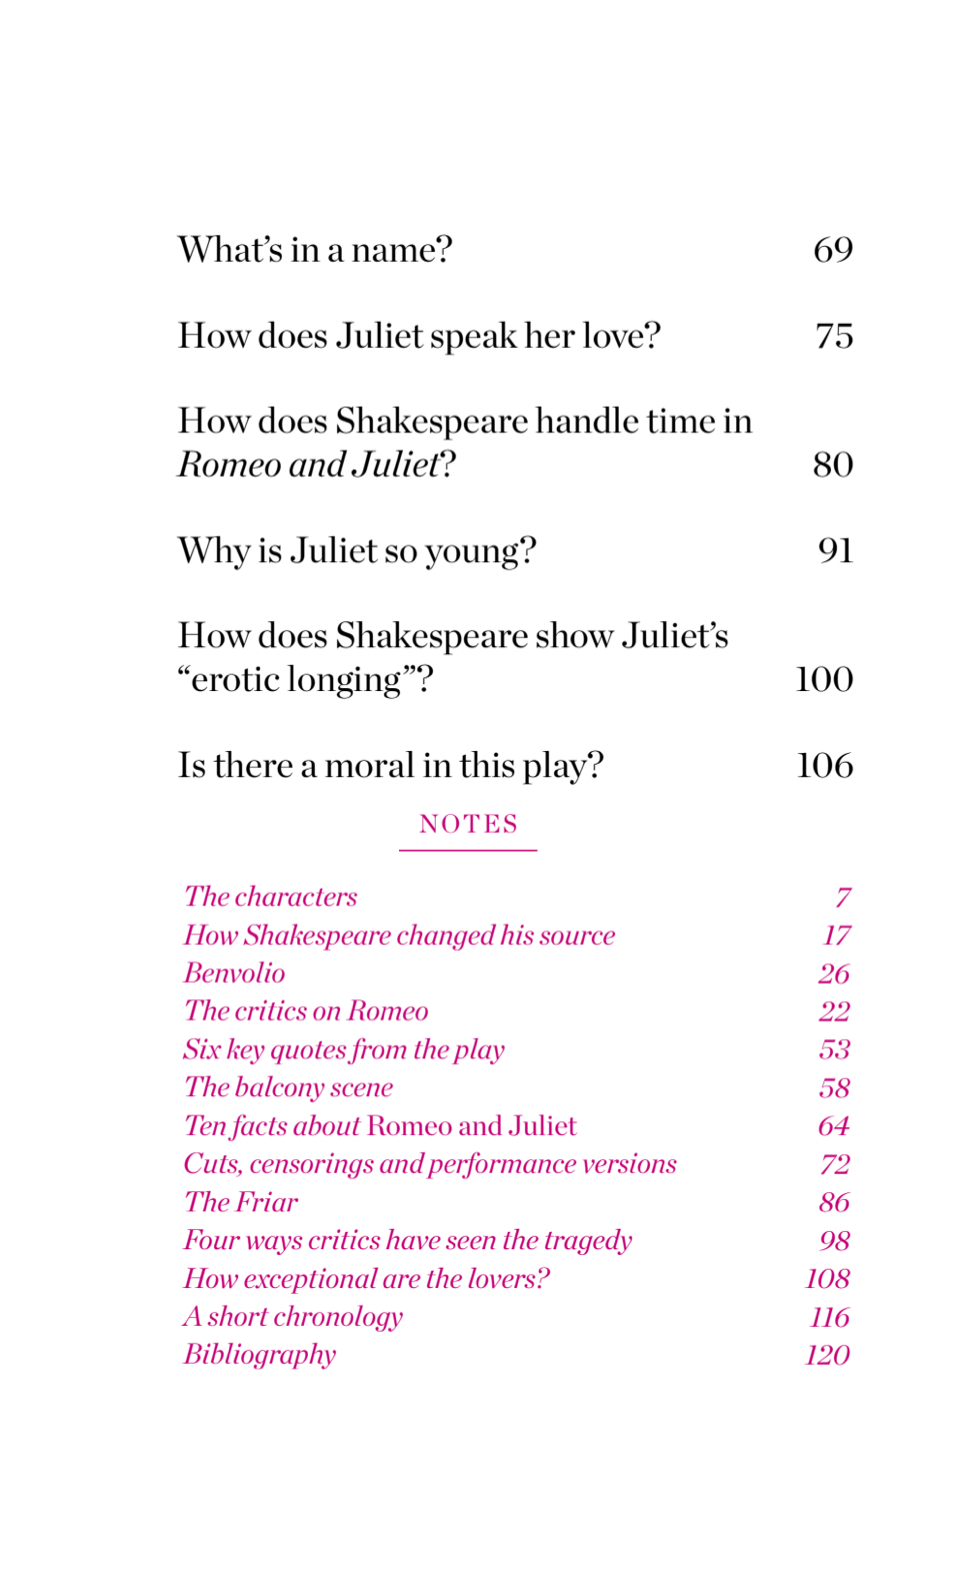 The Day x Connell Guides - The Connell Guide to Shakespeare's Romeo & Juliet